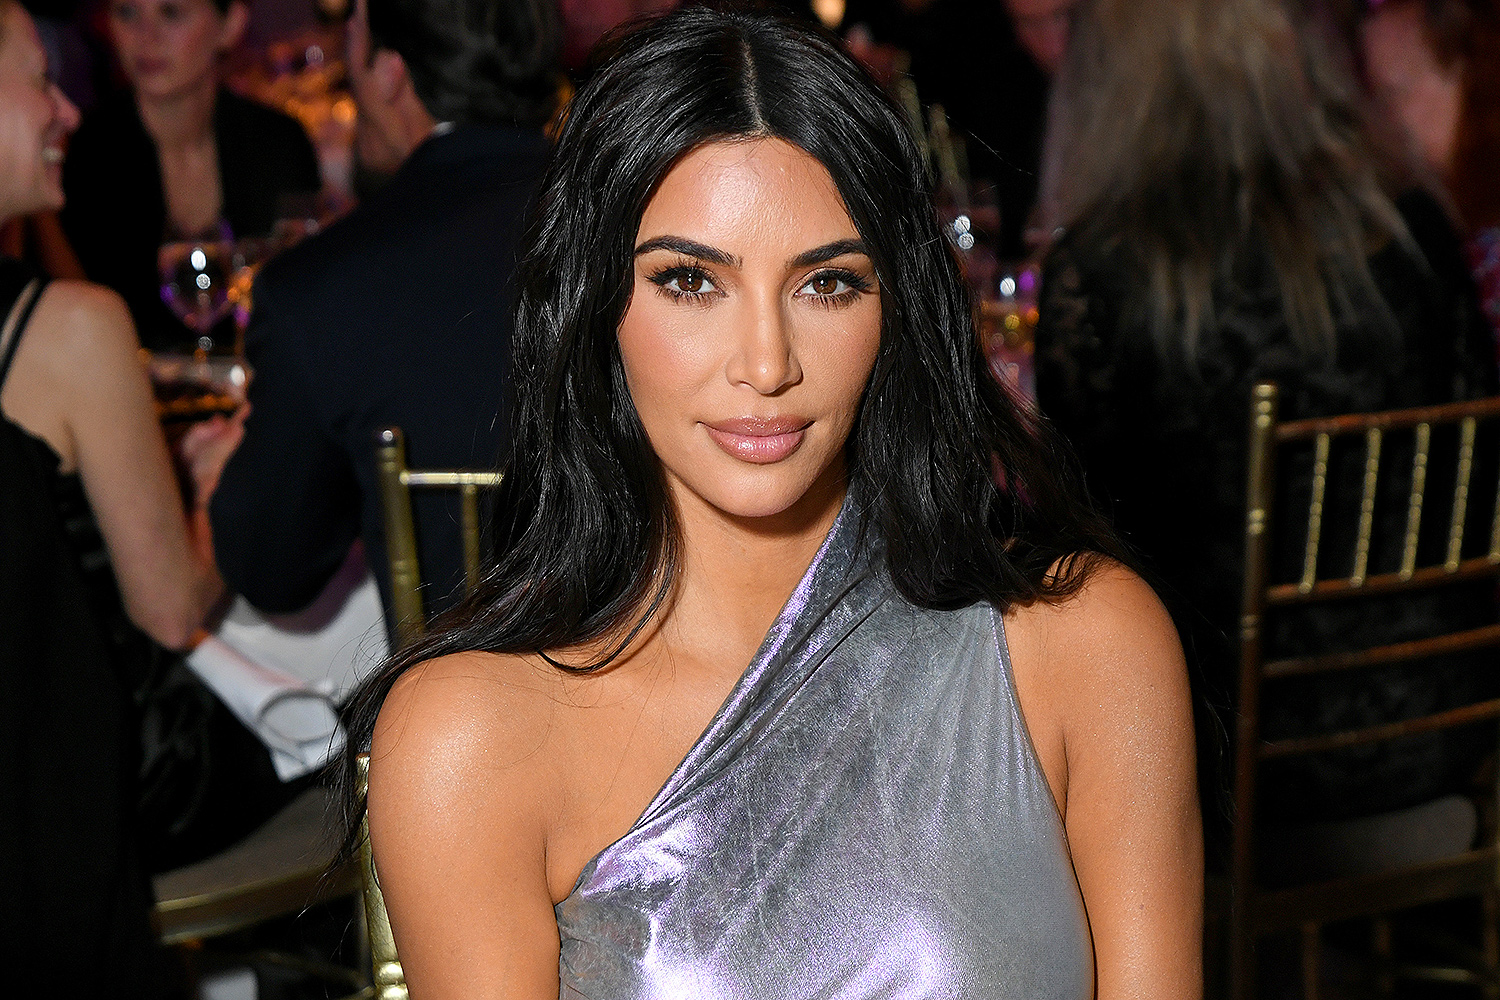 NEW YORK, NEW YORK - OCTOBER 24: Kim Kardashian West attends the FGI 36th Annual Night of Stars Gala at Cipriani Wall Street on October 24, 2019 in New York City. (Photo by Jared Siskin/Patrick McMullan via Getty Images)